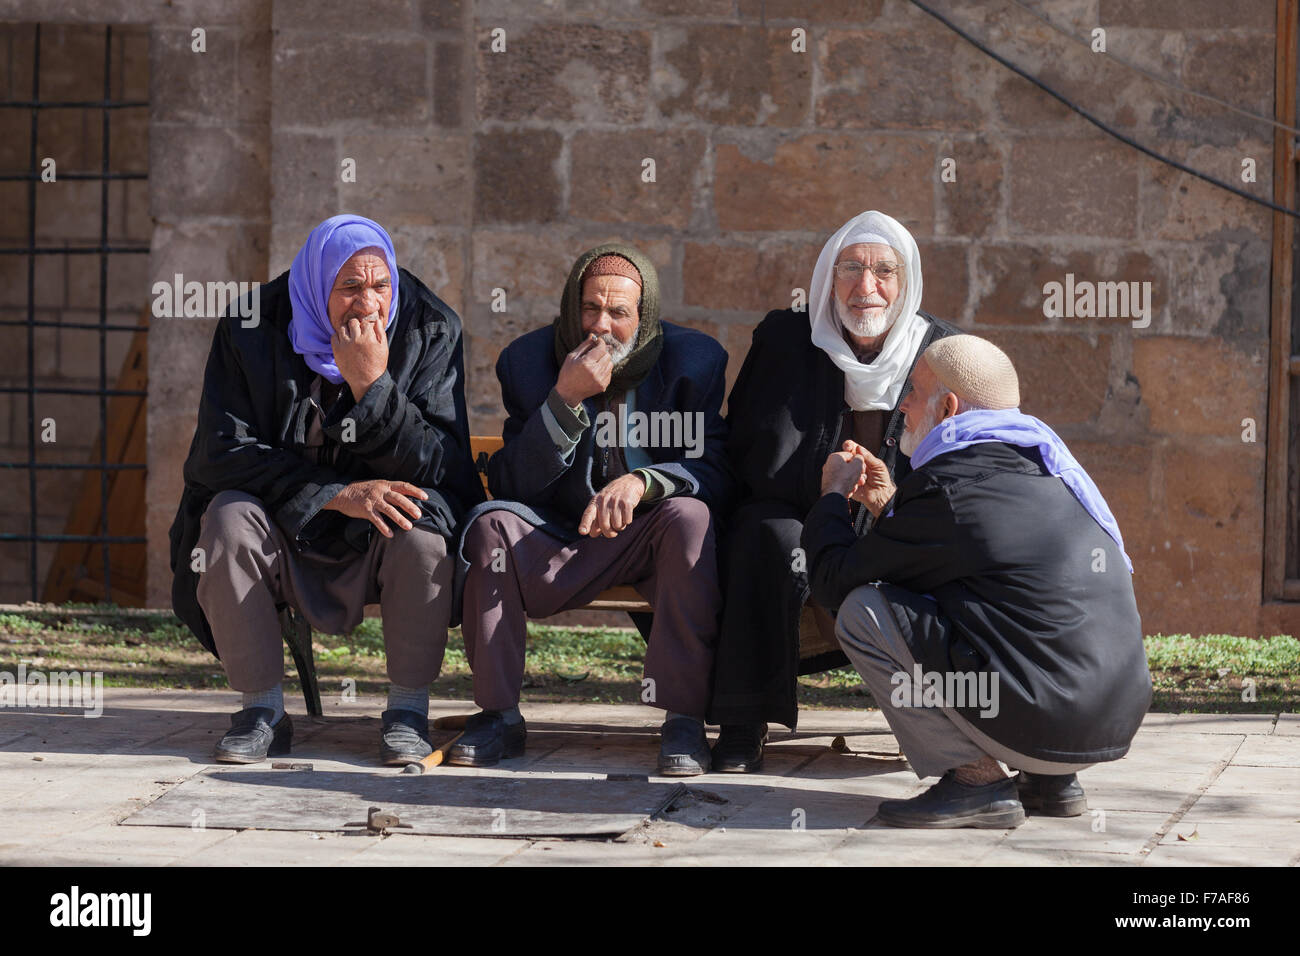 old men with his traditional dressing stands in front of the sandstones of an ancient building in Harran Plain, Sanliurfa,Turkey Stock Photo